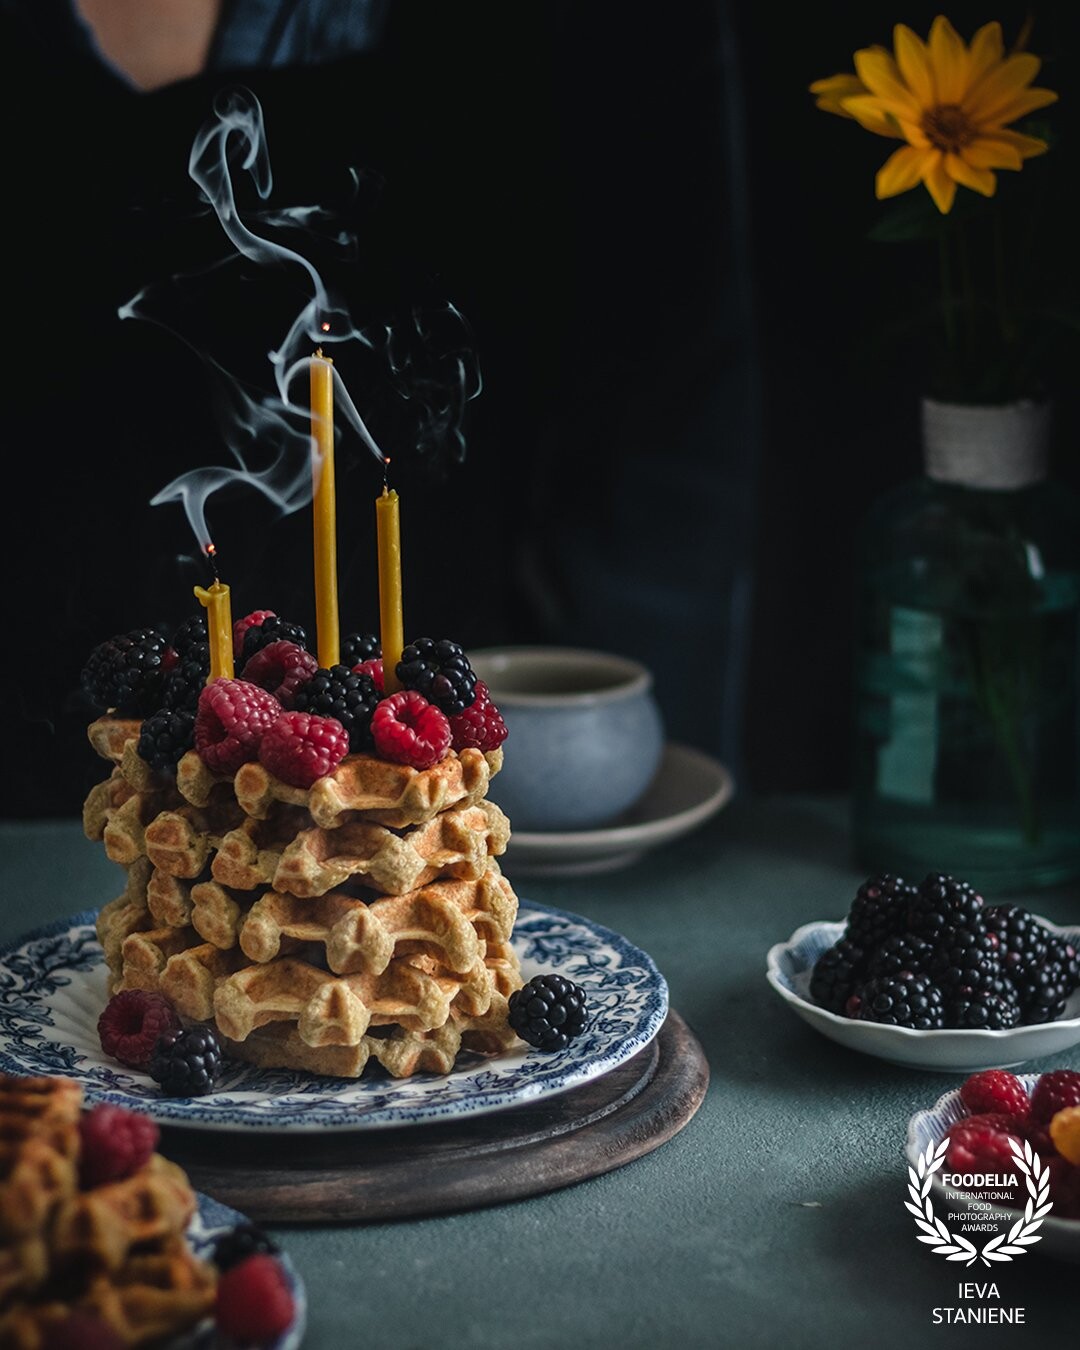 I wanted to create moody and a little bit festive atmosphere in this image. The neighboring colors of the backdrop and props, the dark background, layering and some smoke helps to catch the attention on the waffles.